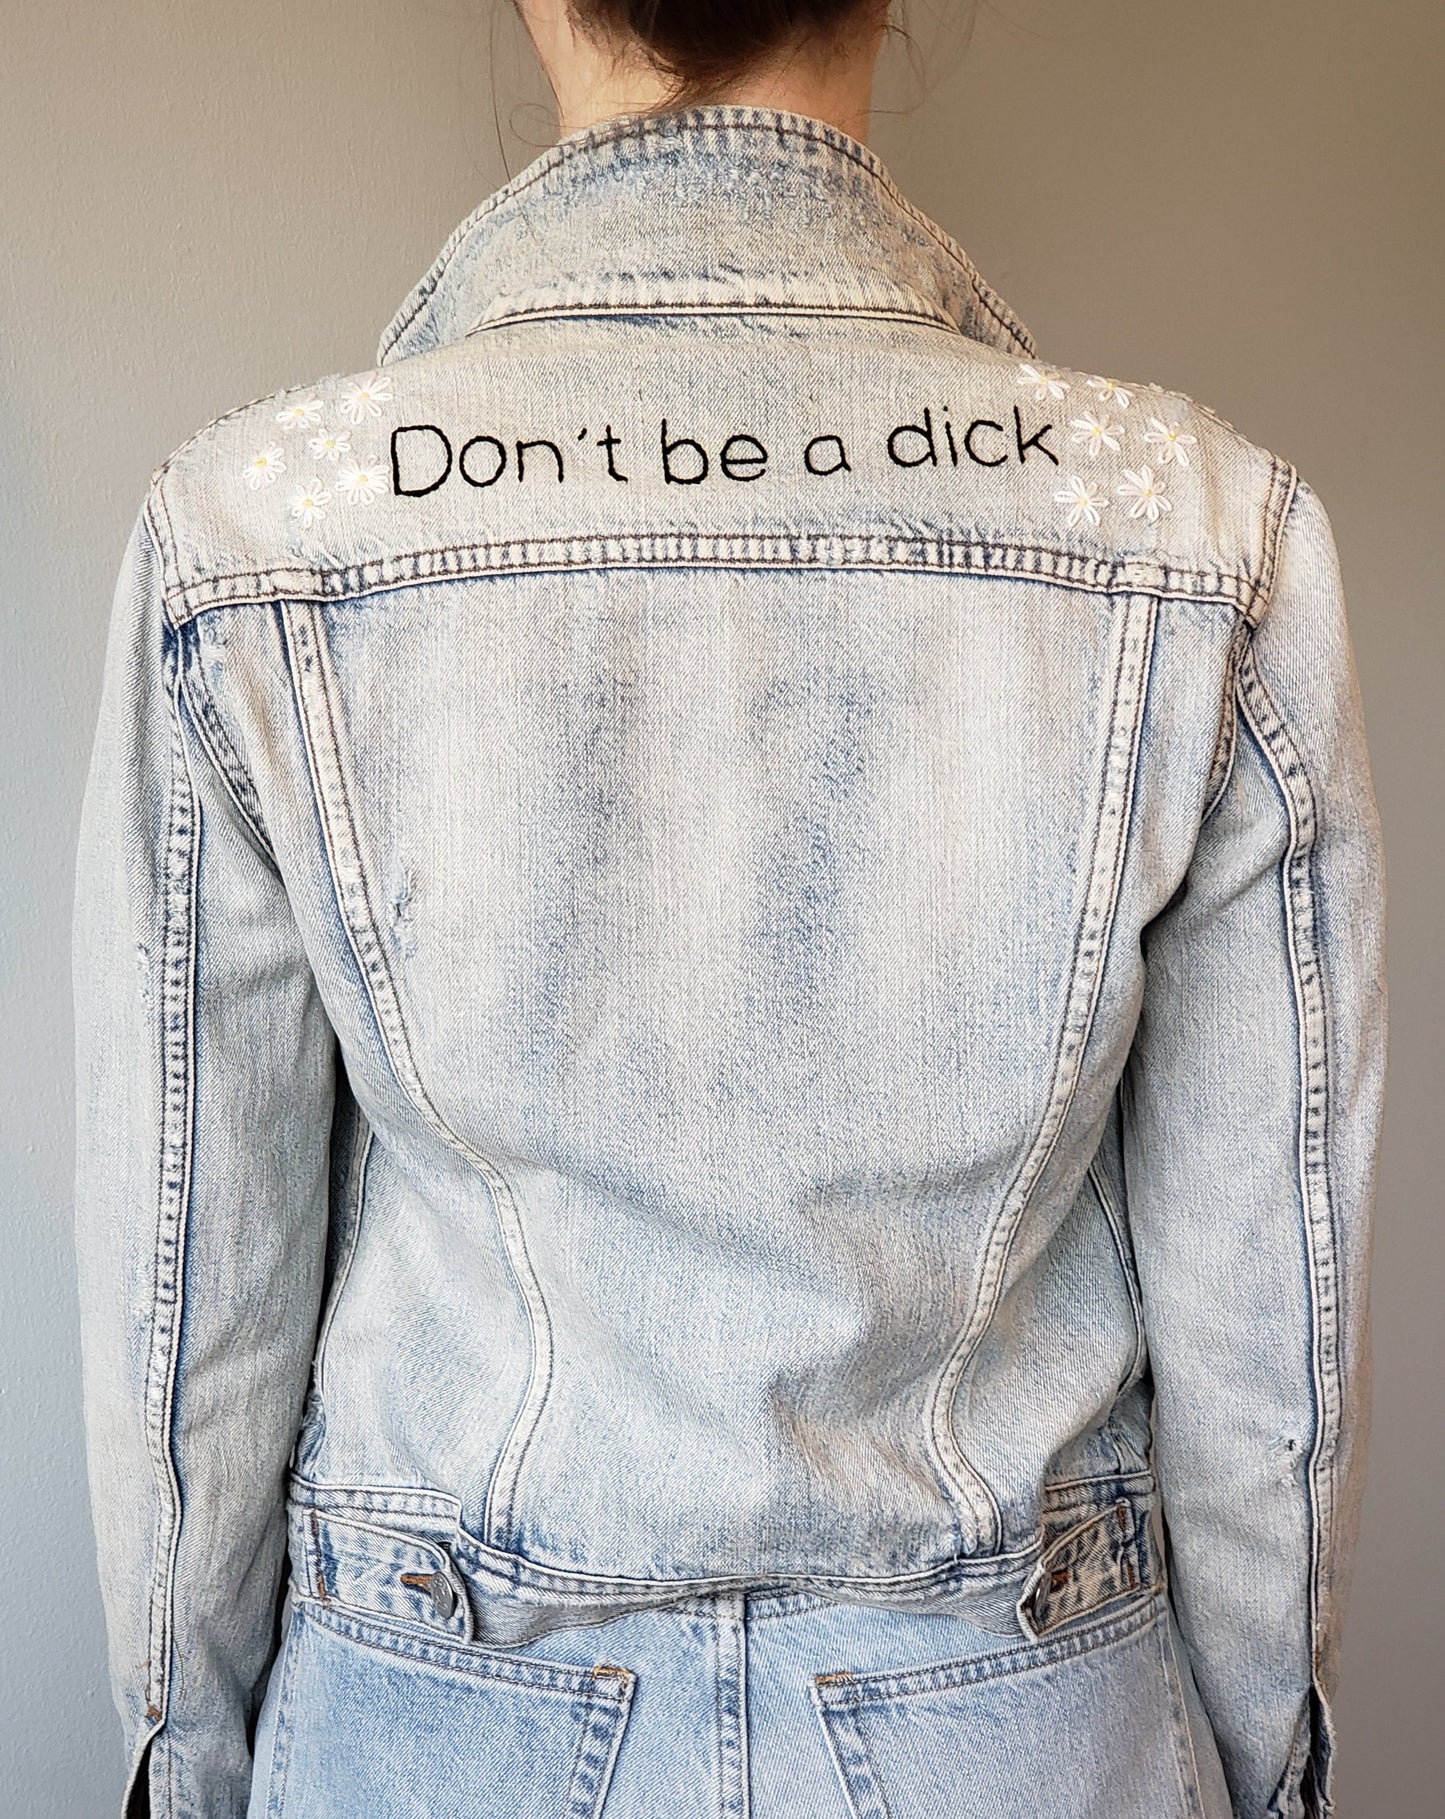 A woman wears an acid wash denim jacket in front of a light grey background. The jacket has "Don't be a dick" hand embroidered in black, and daises sewn on both shoulders. There are 6 daisies on each shoulder.